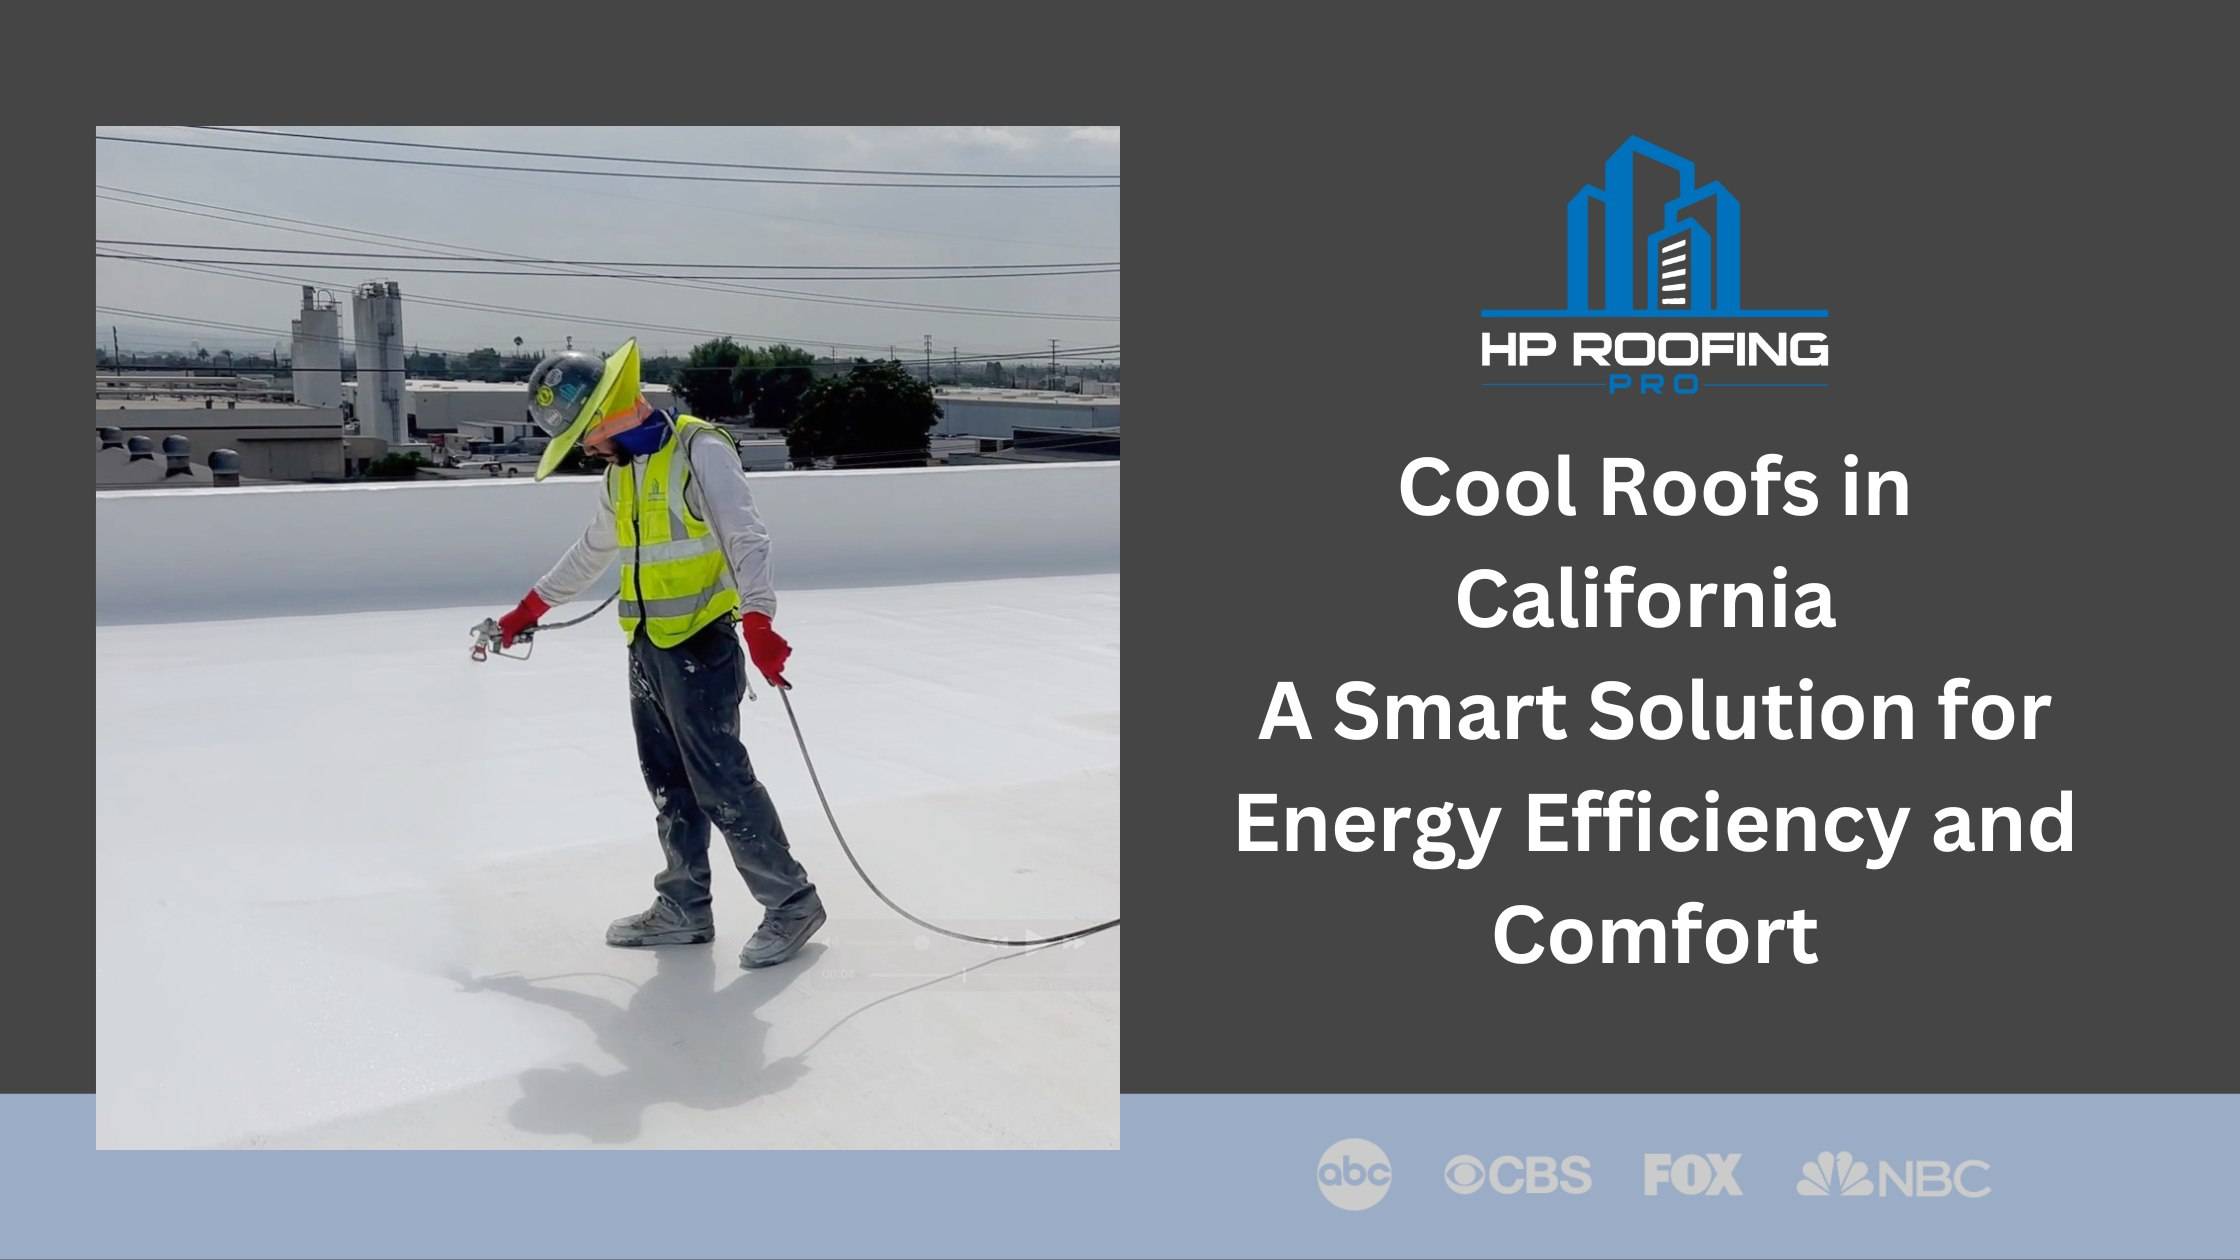 Cool Roofs in California: A Smart Solution for Energy Efficiency and Comfort